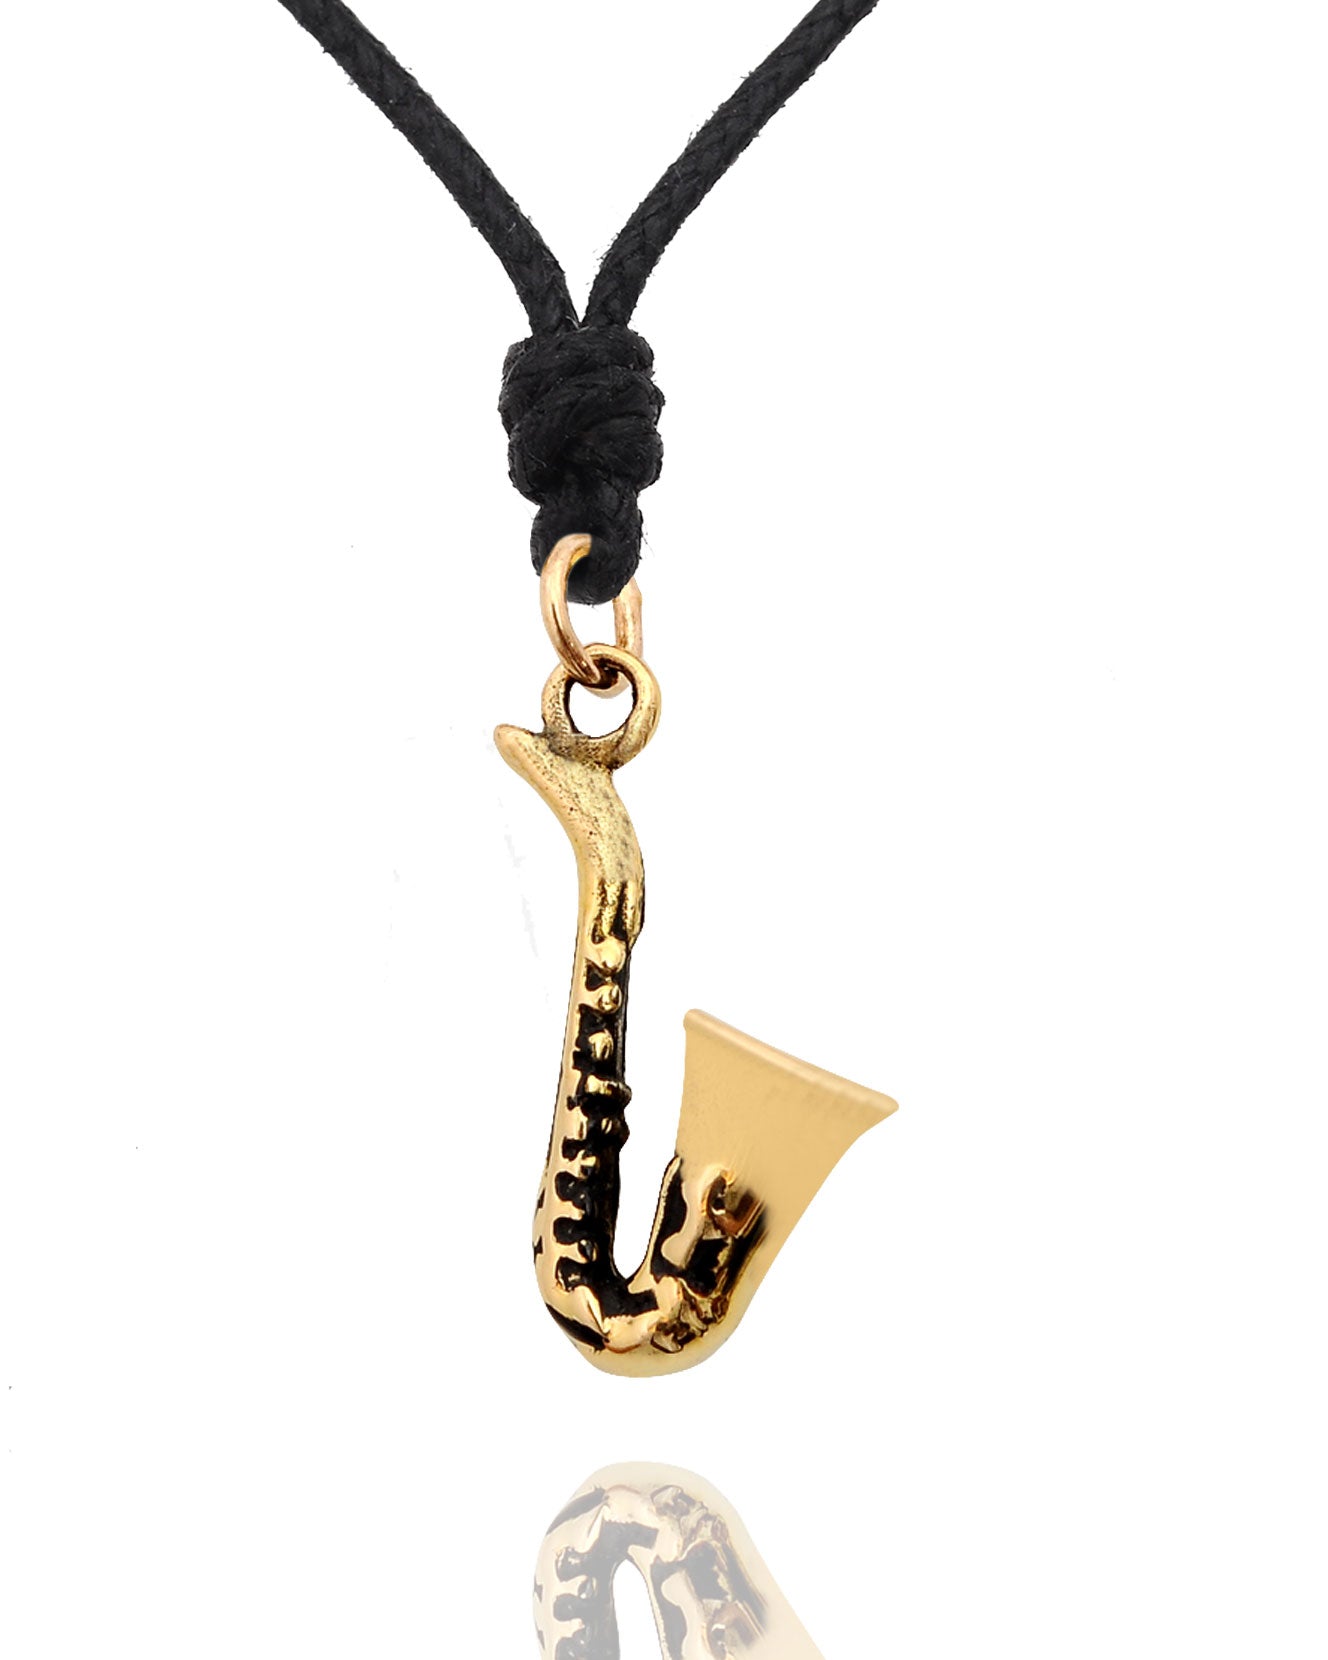 Saxophone Handmade 92.5 Sterling Silver Gold Brass Necklace Pendant Jewelry